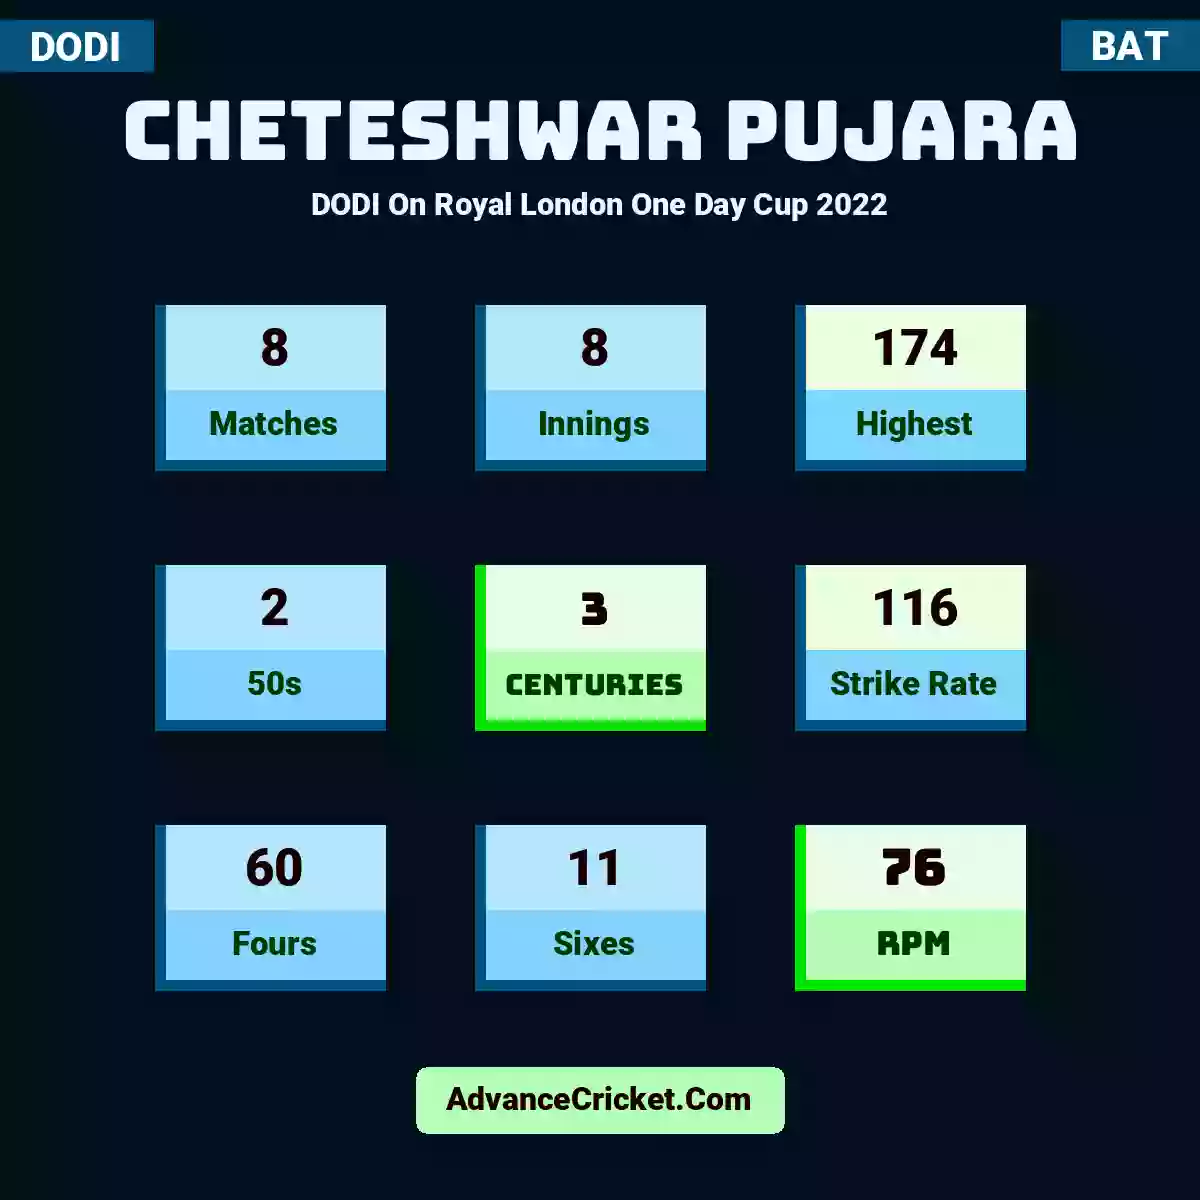 Cheteshwar Pujara DODI  On Royal London One Day Cup 2022, Cheteshwar Pujara played 8 matches, scored 174 runs as highest, 2 half-centuries, and 3 centuries, with a strike rate of 116. C.Pujara hit 60 fours and 11 sixes, with an RPM of 76.